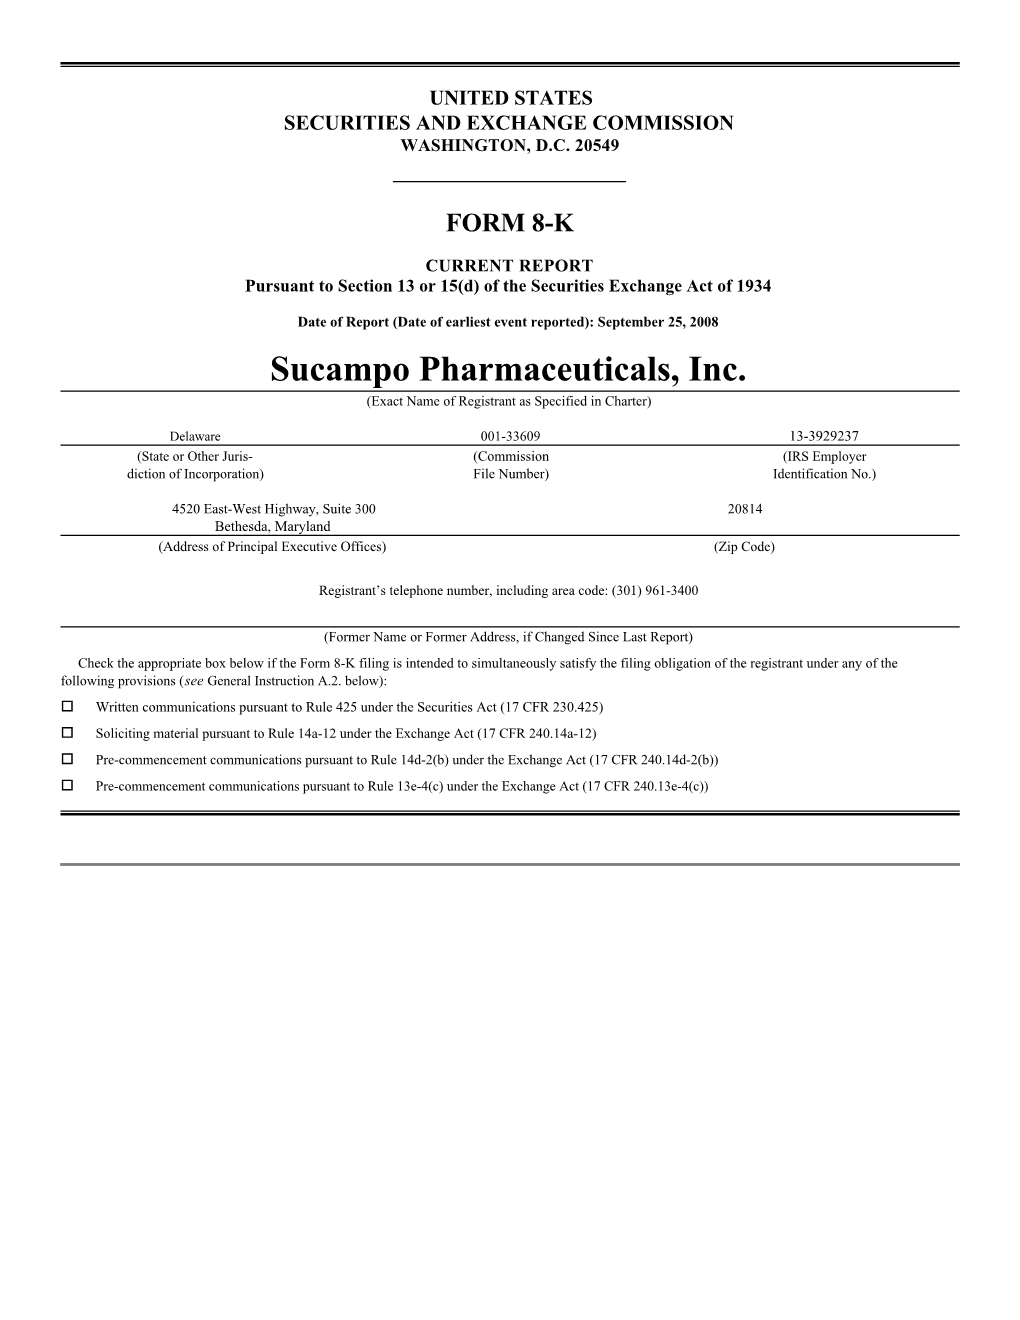 Sucampo Pharmaceuticals, Inc. (Exact Name of Registrant As Specified in Charter)